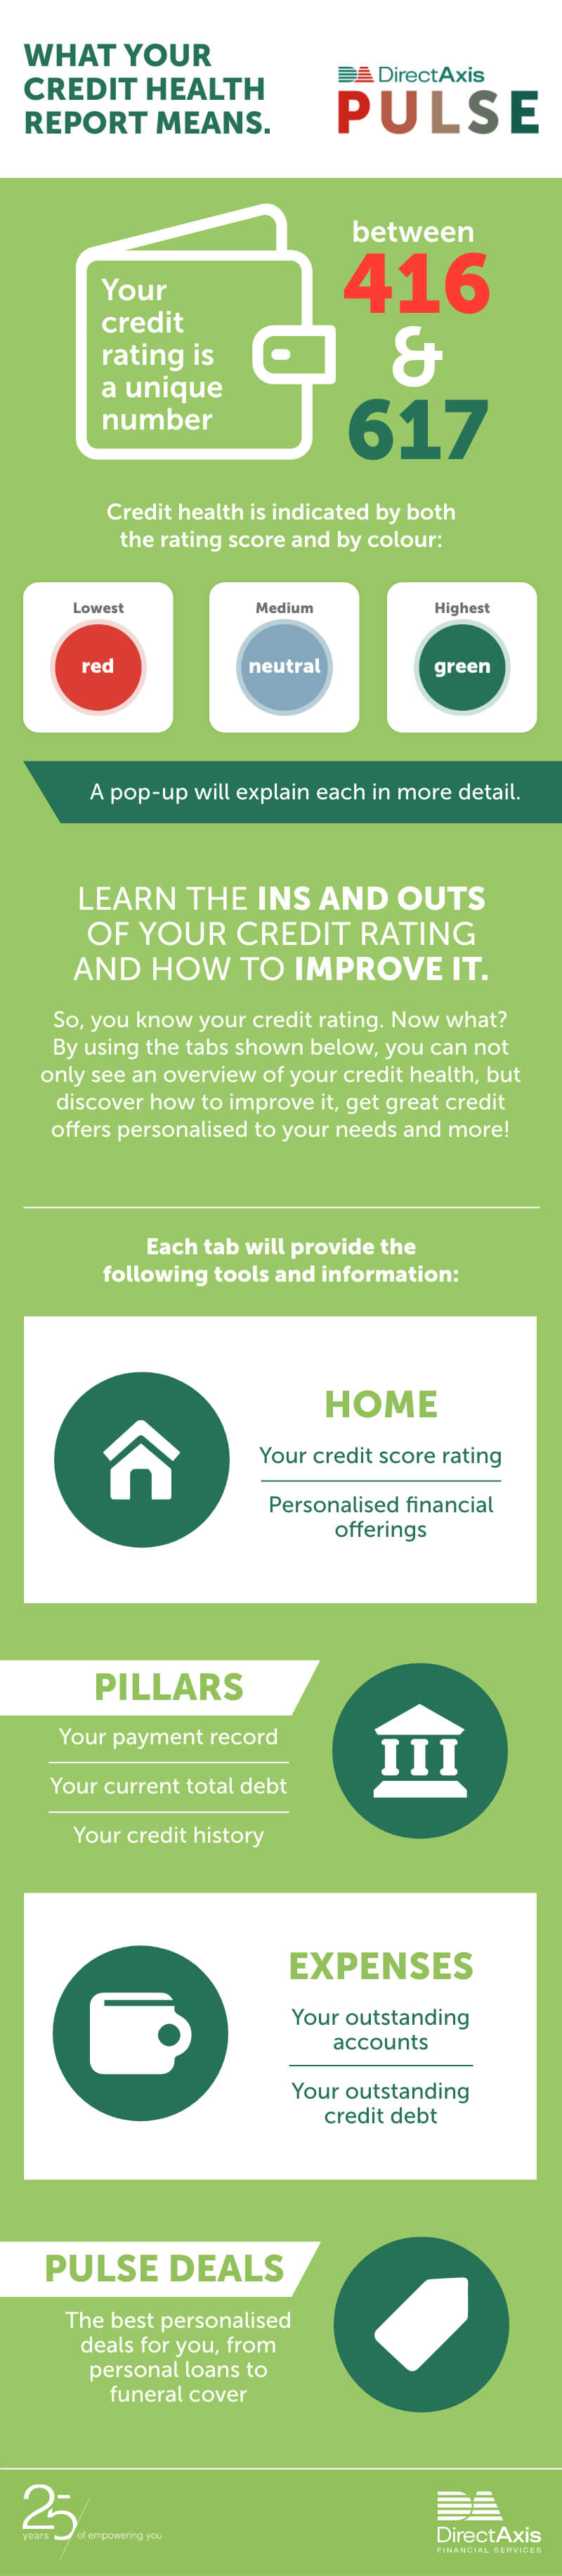 What your credit health report means